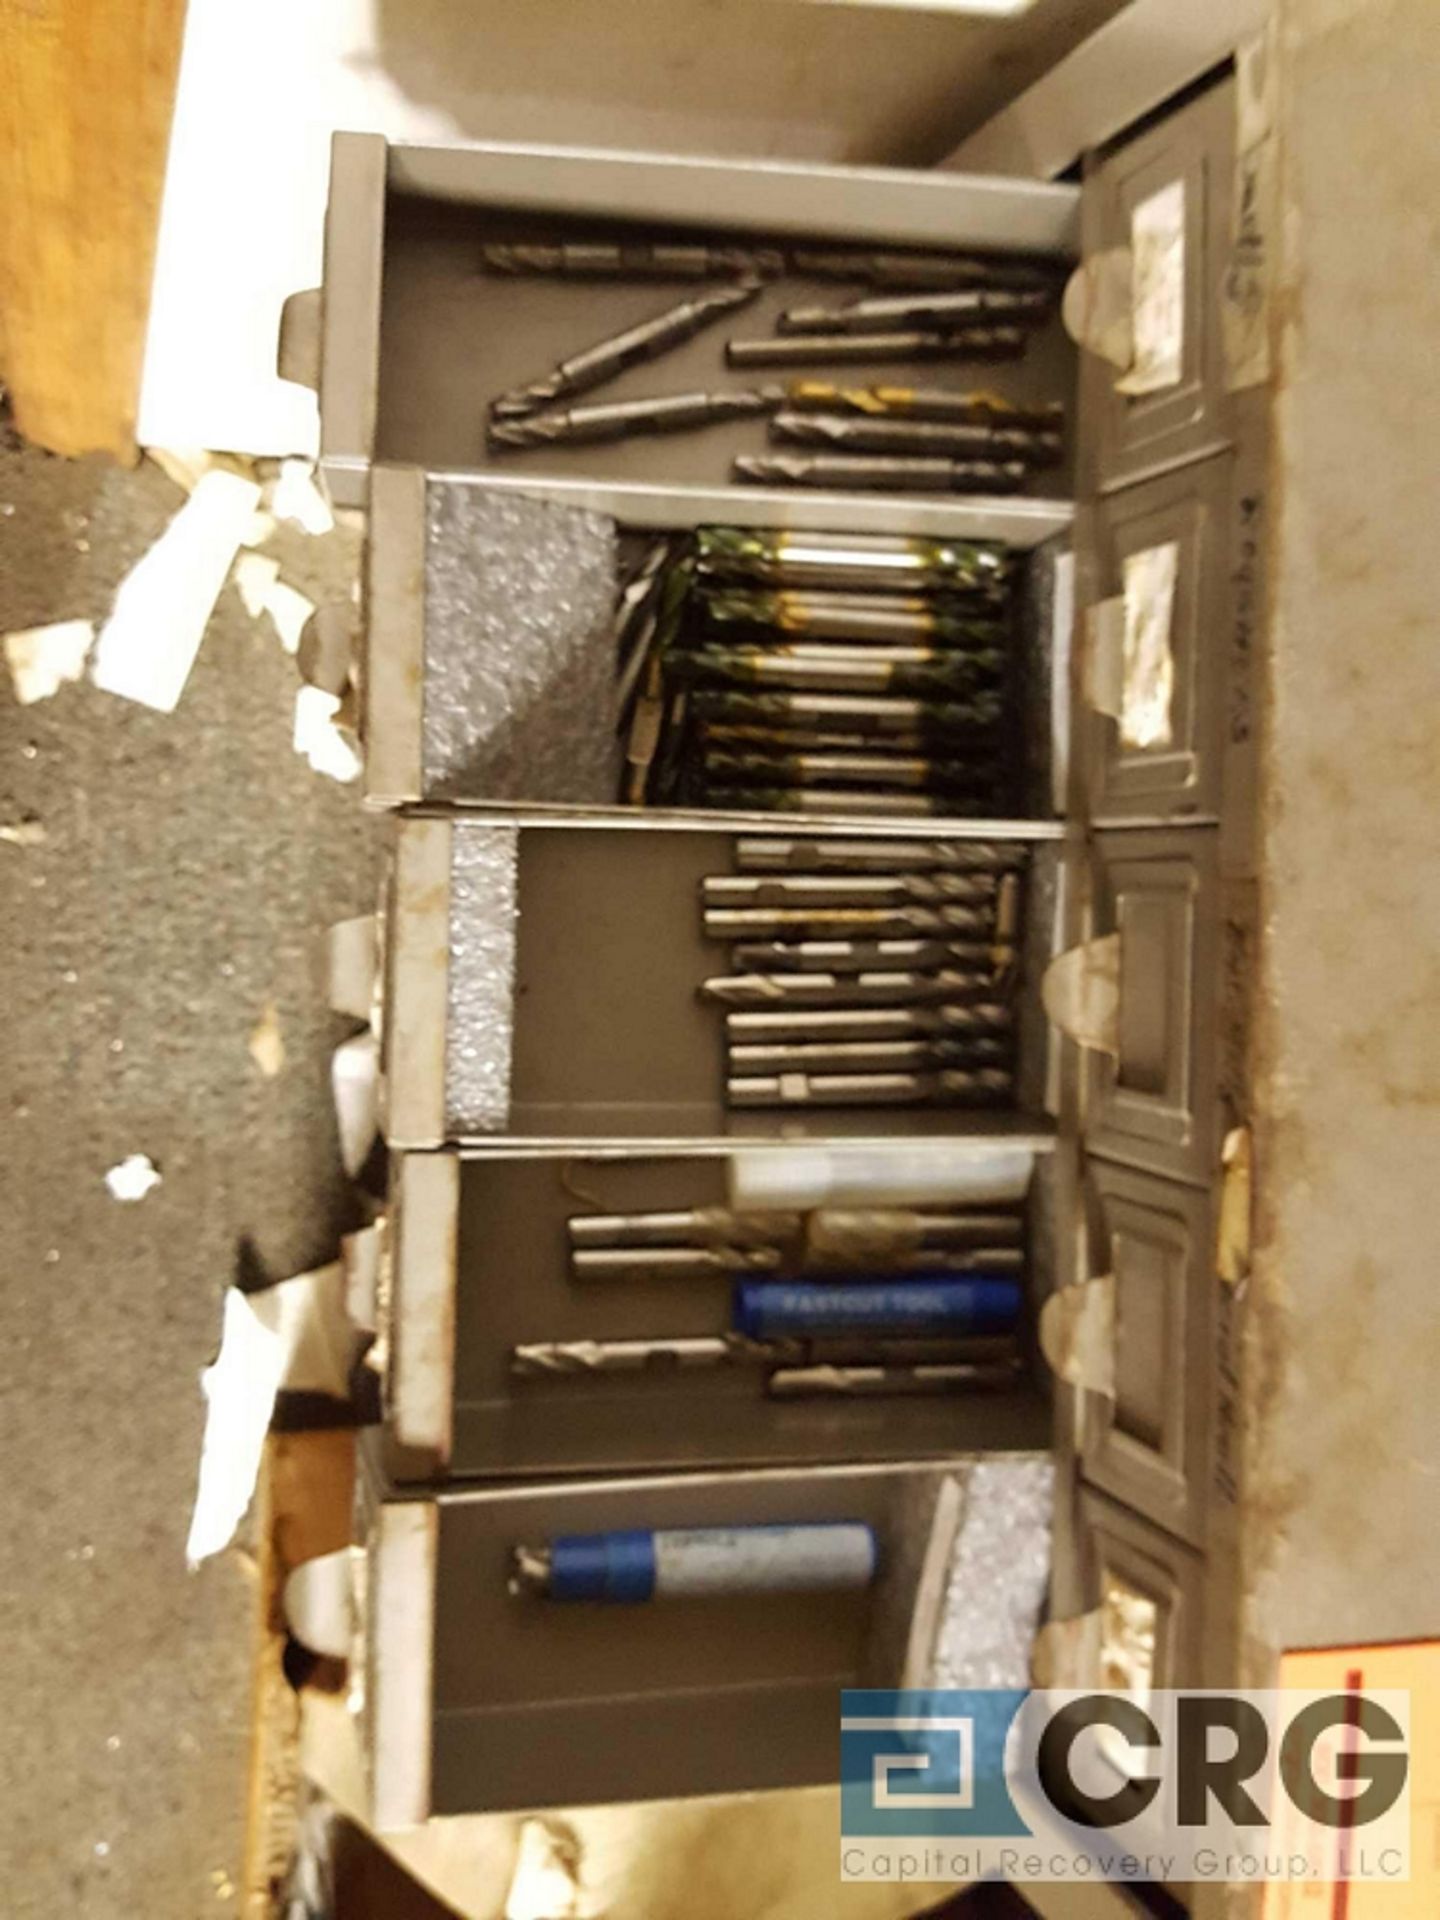 Lot includes (2) cabinets and contents of assorted end mills and cutting tools etc. - Image 6 of 28